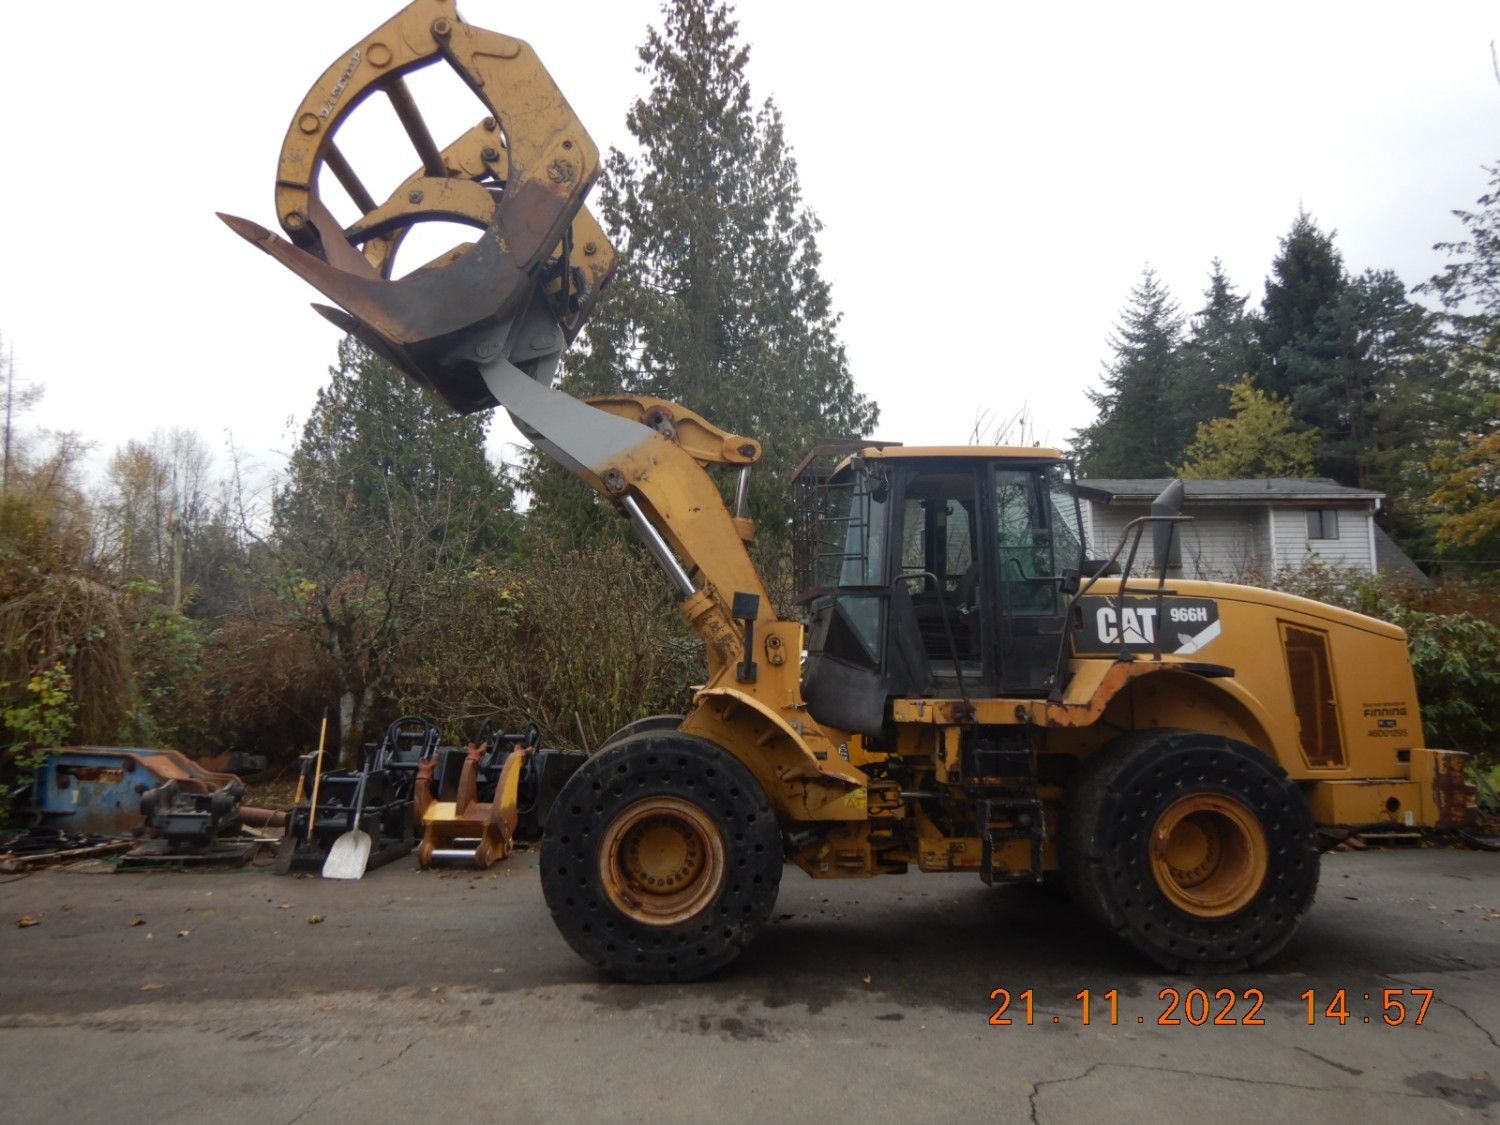 **** SOLD  ****  2010 CAT 966H C/W CUSTOM DAEQUIP DUAL LOG OR PIPE GRAPPLE WITH INTERNAL GRAPPLE TO KEEP PIPE - LOGS - POLES SECURE